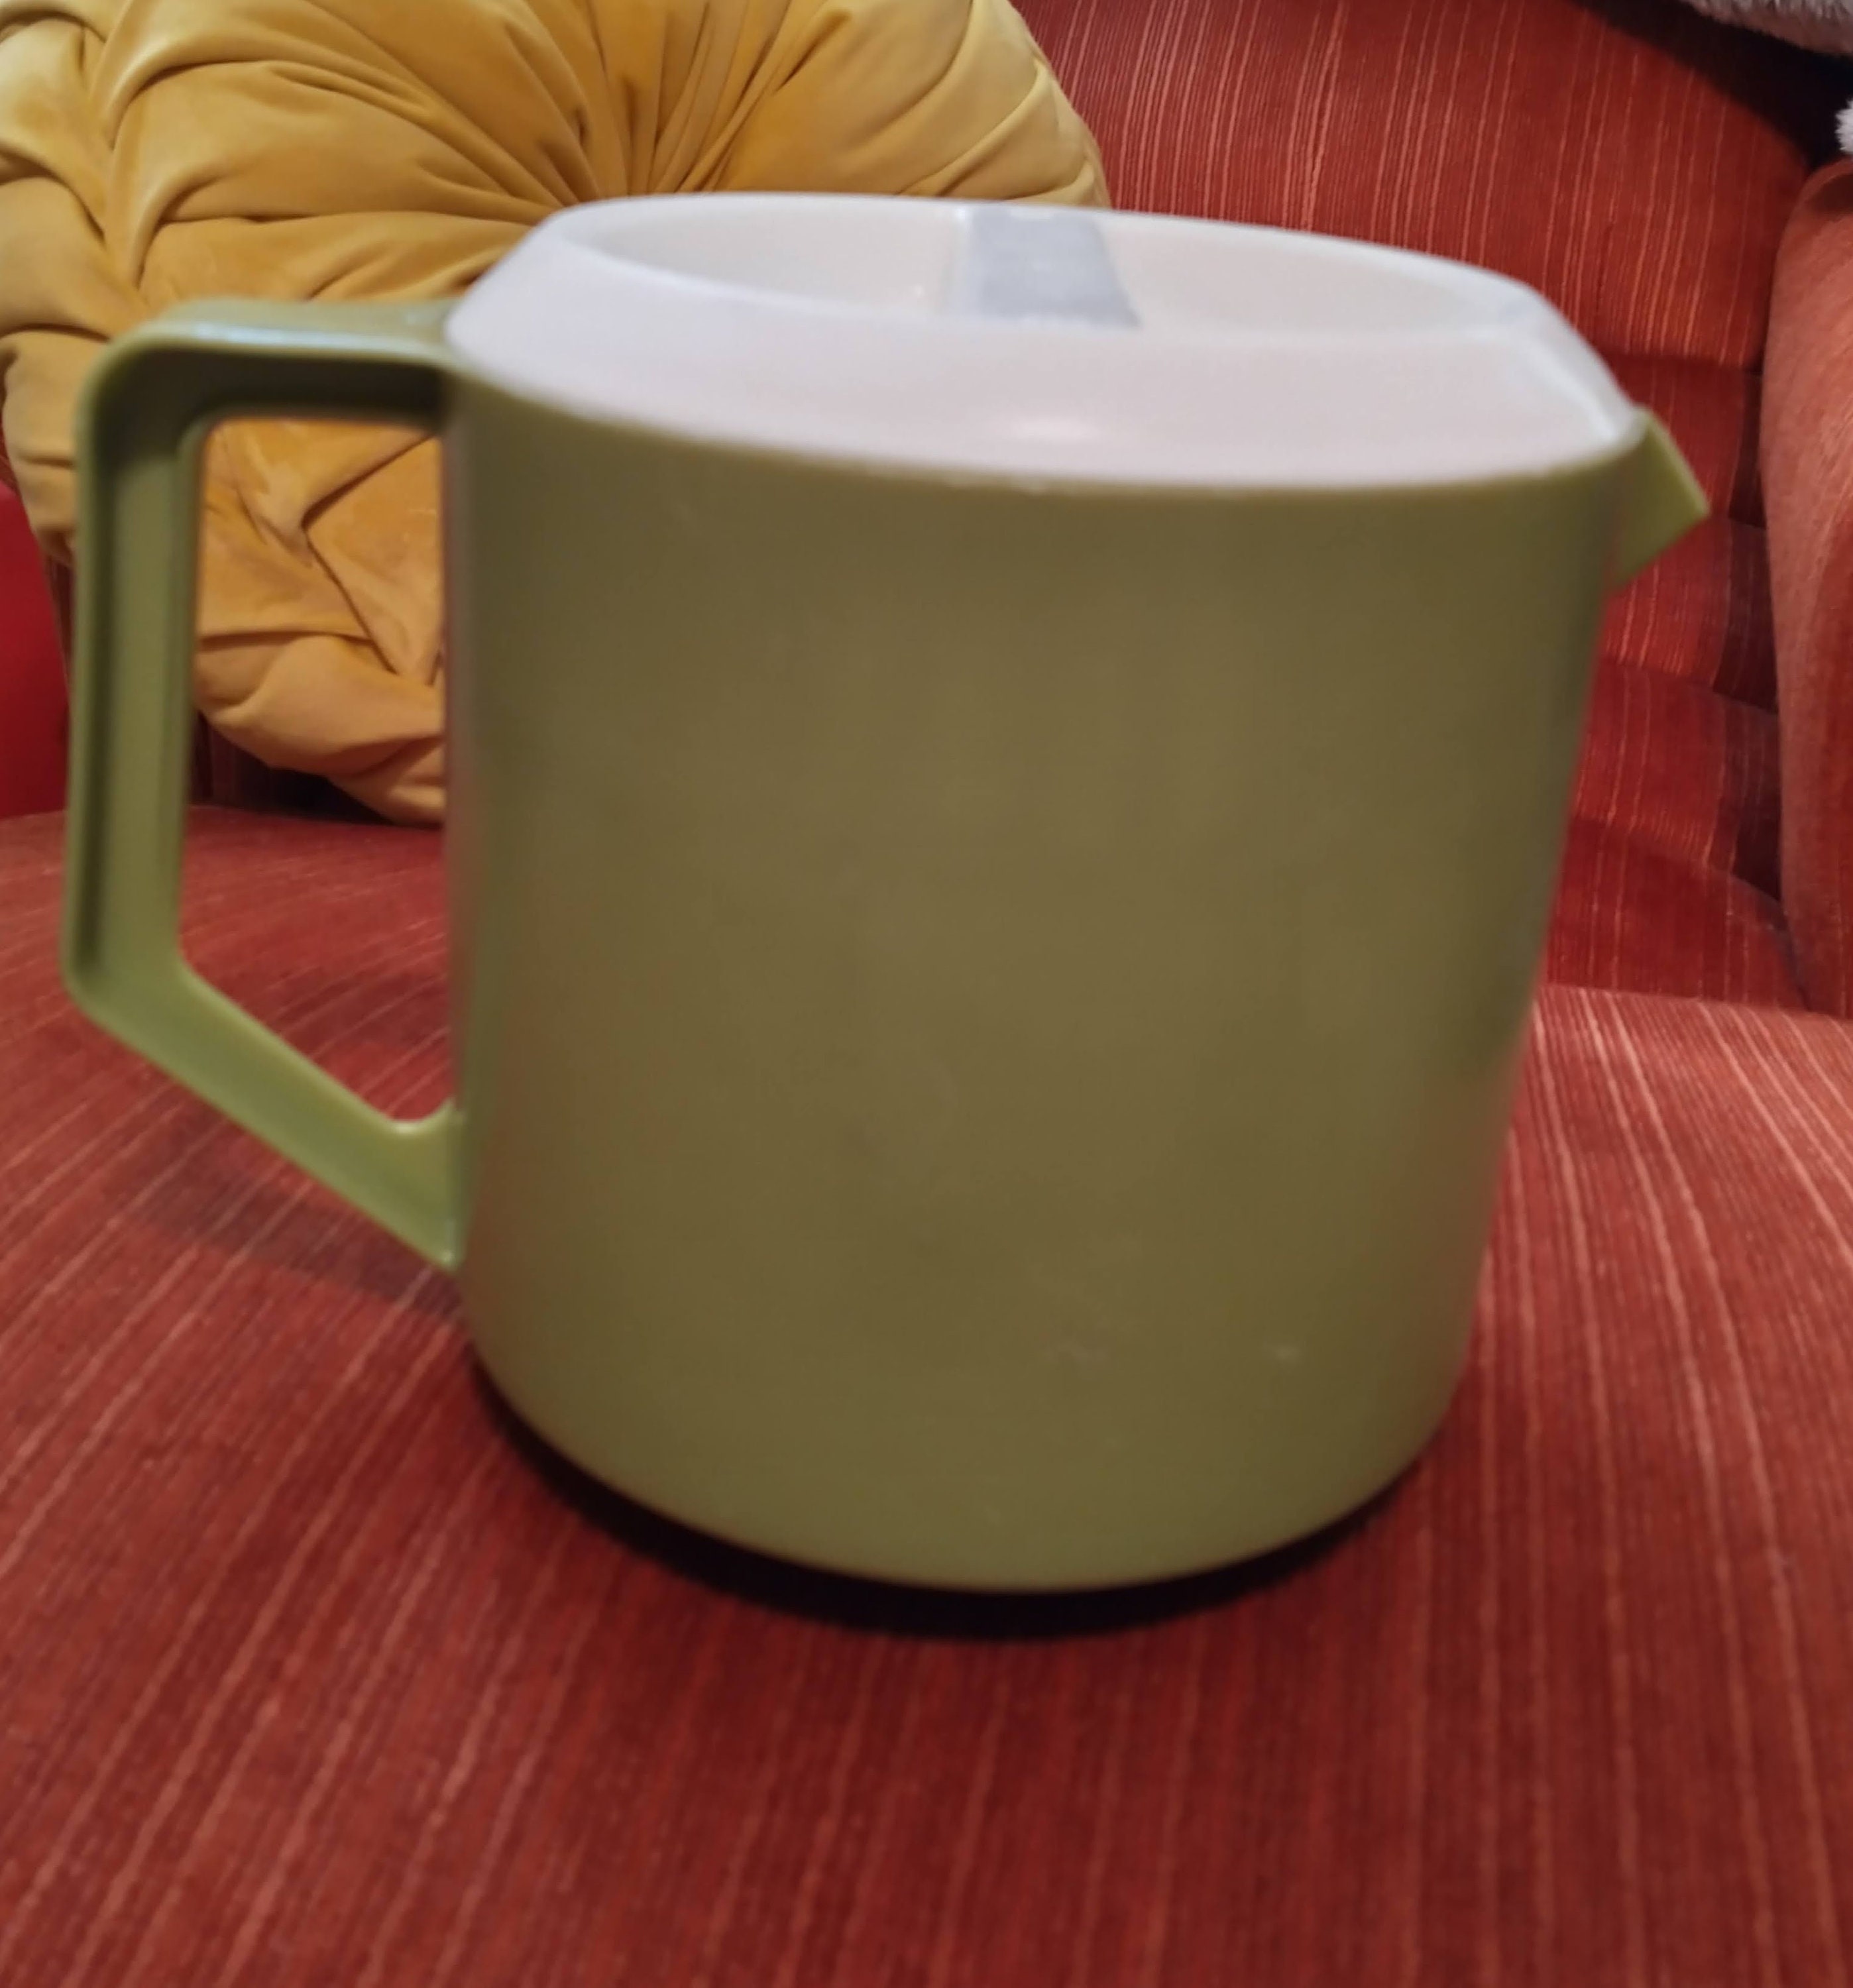 Vtg Rubbermaid Pitcher w Lid Avocado￼ Green 2 Quart Ribbed Middle #2678 USA